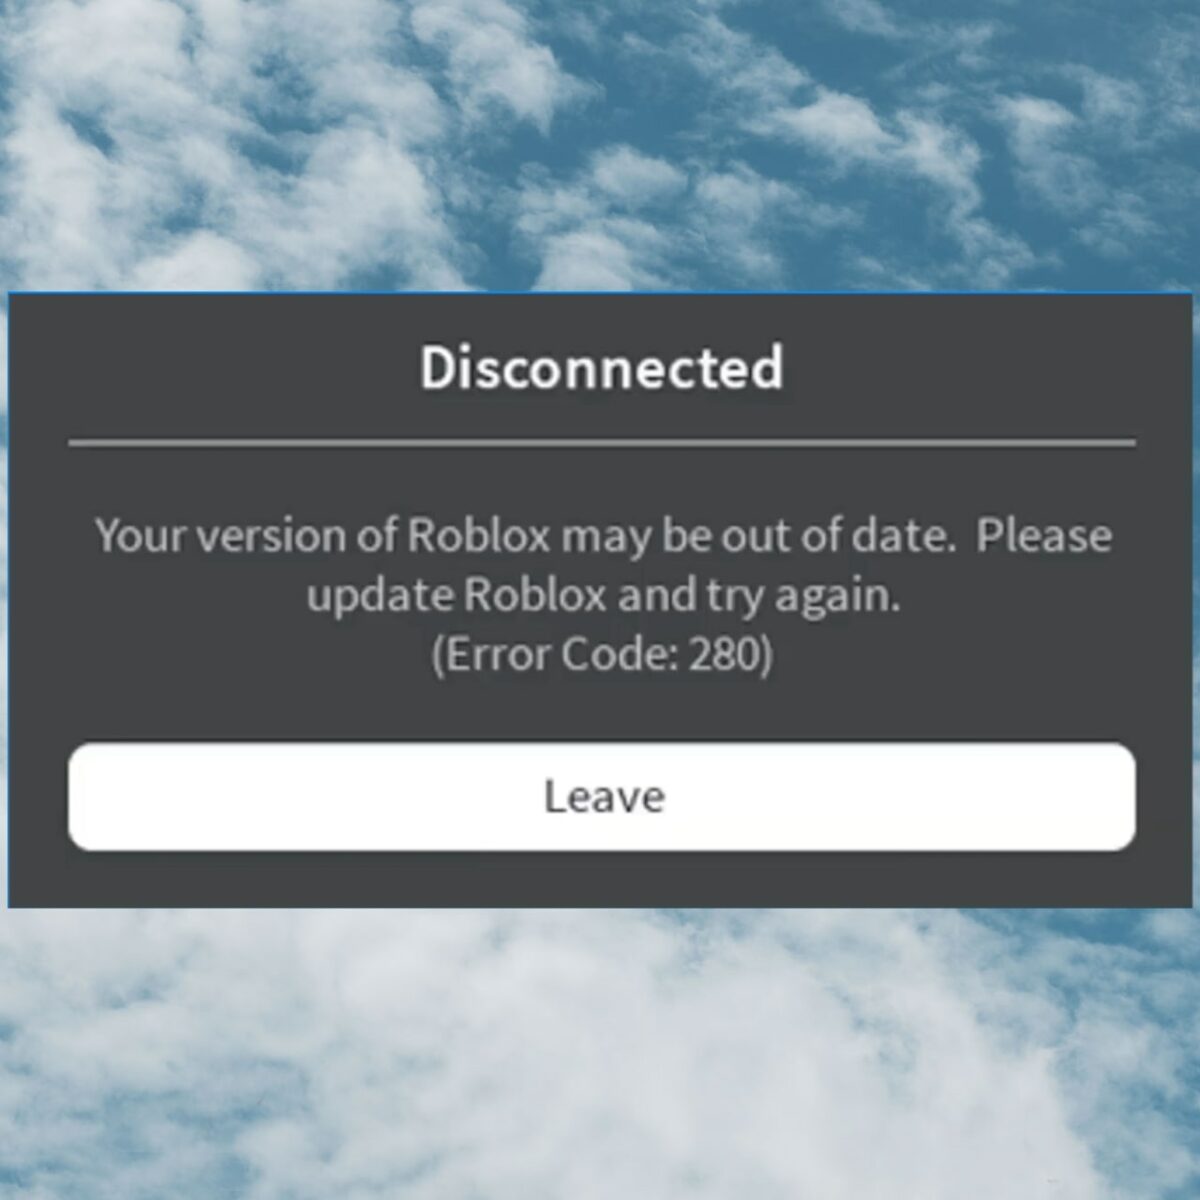 On Roblox, I receive an error message 'Roblox error code 279 and